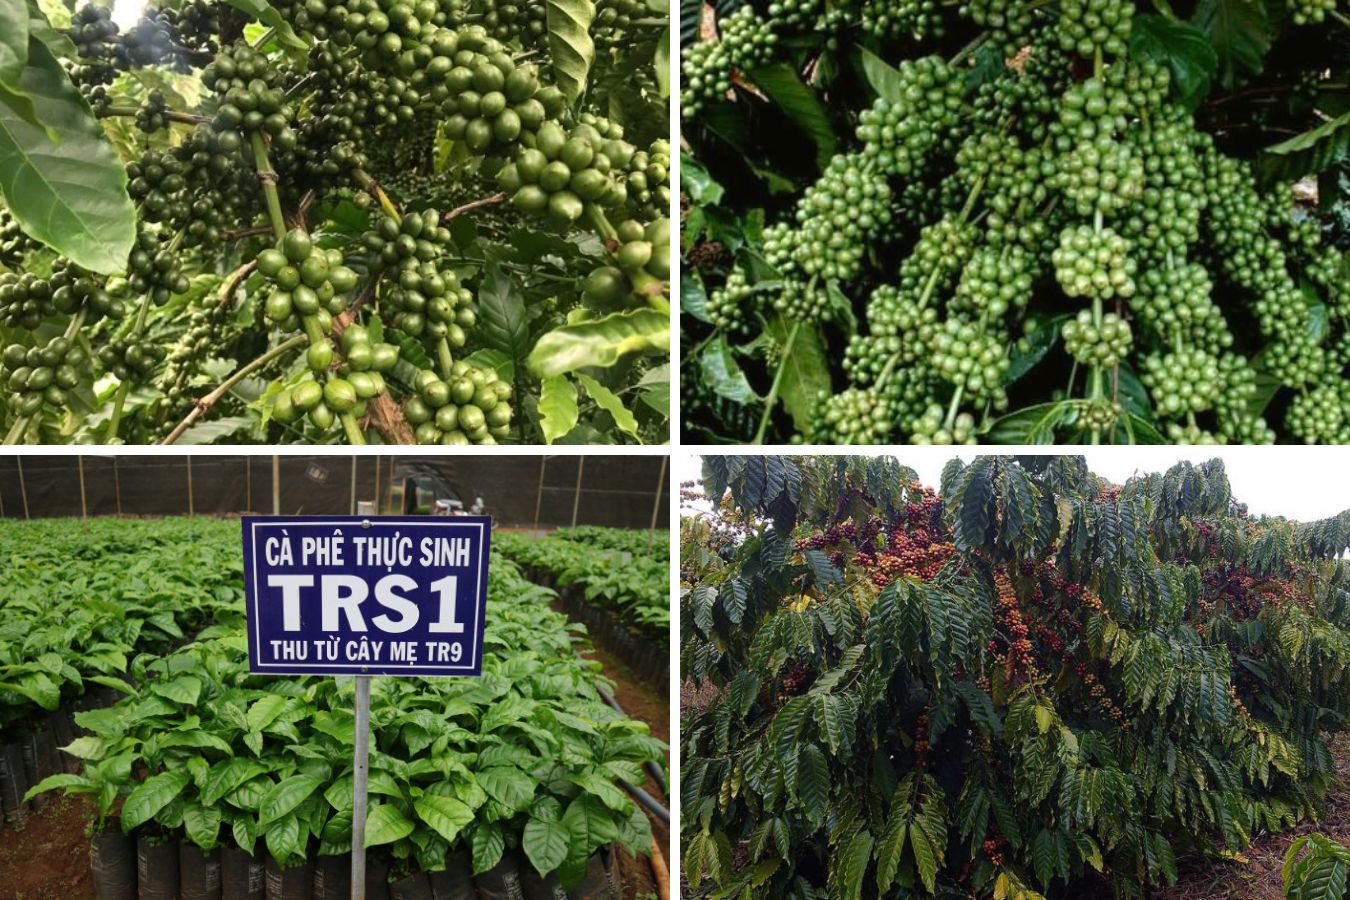 The best coffee varieties today TS5, TR4, TR9, TRS1, String coffee